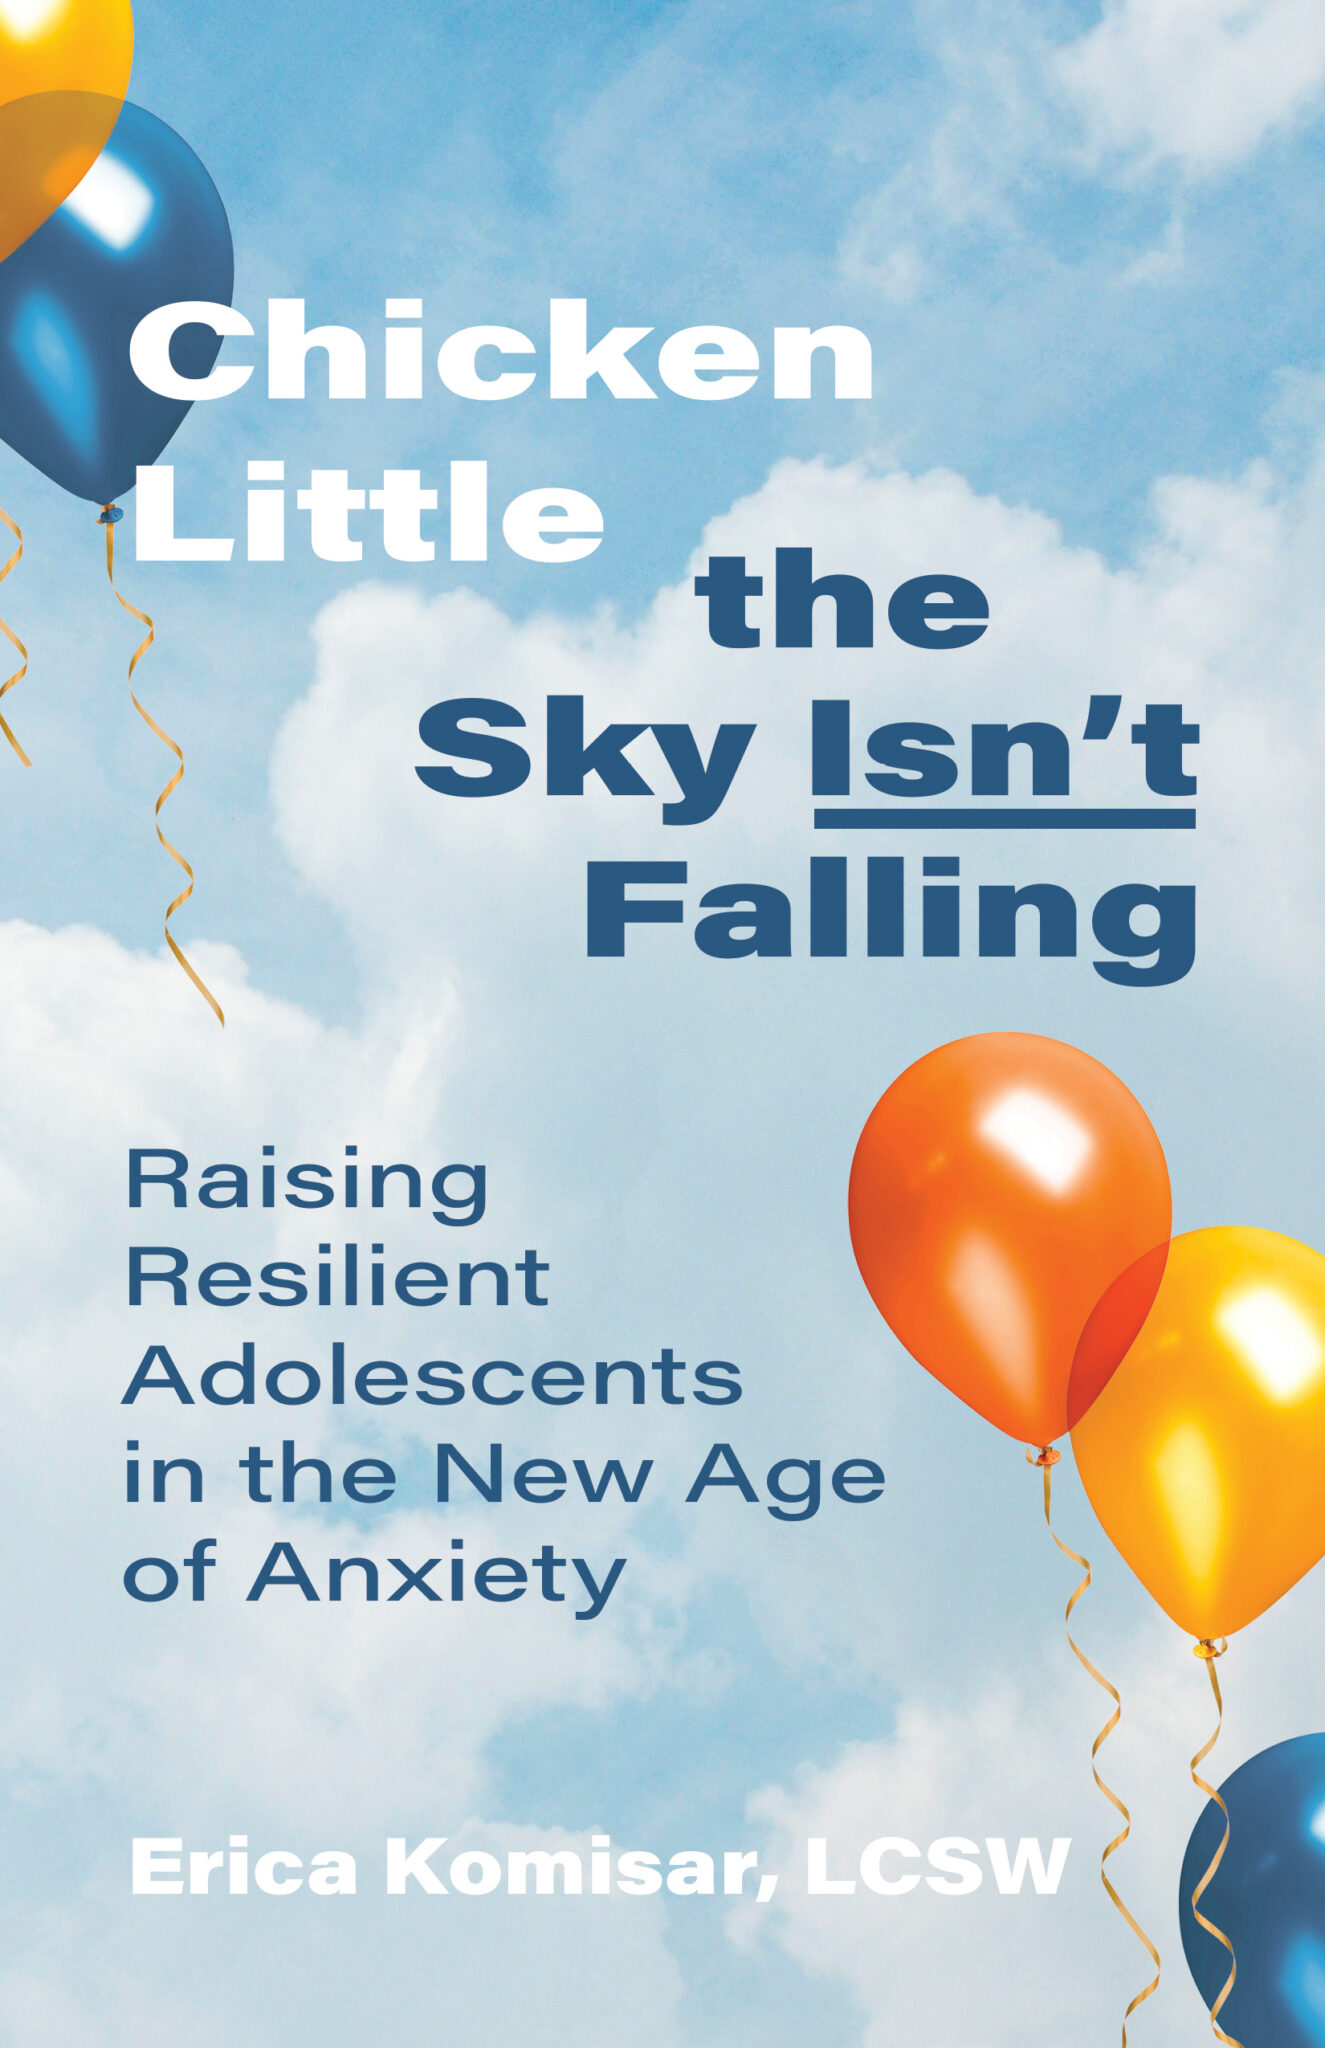 Raising Resilient Adolescents in the New Age of Anxiety